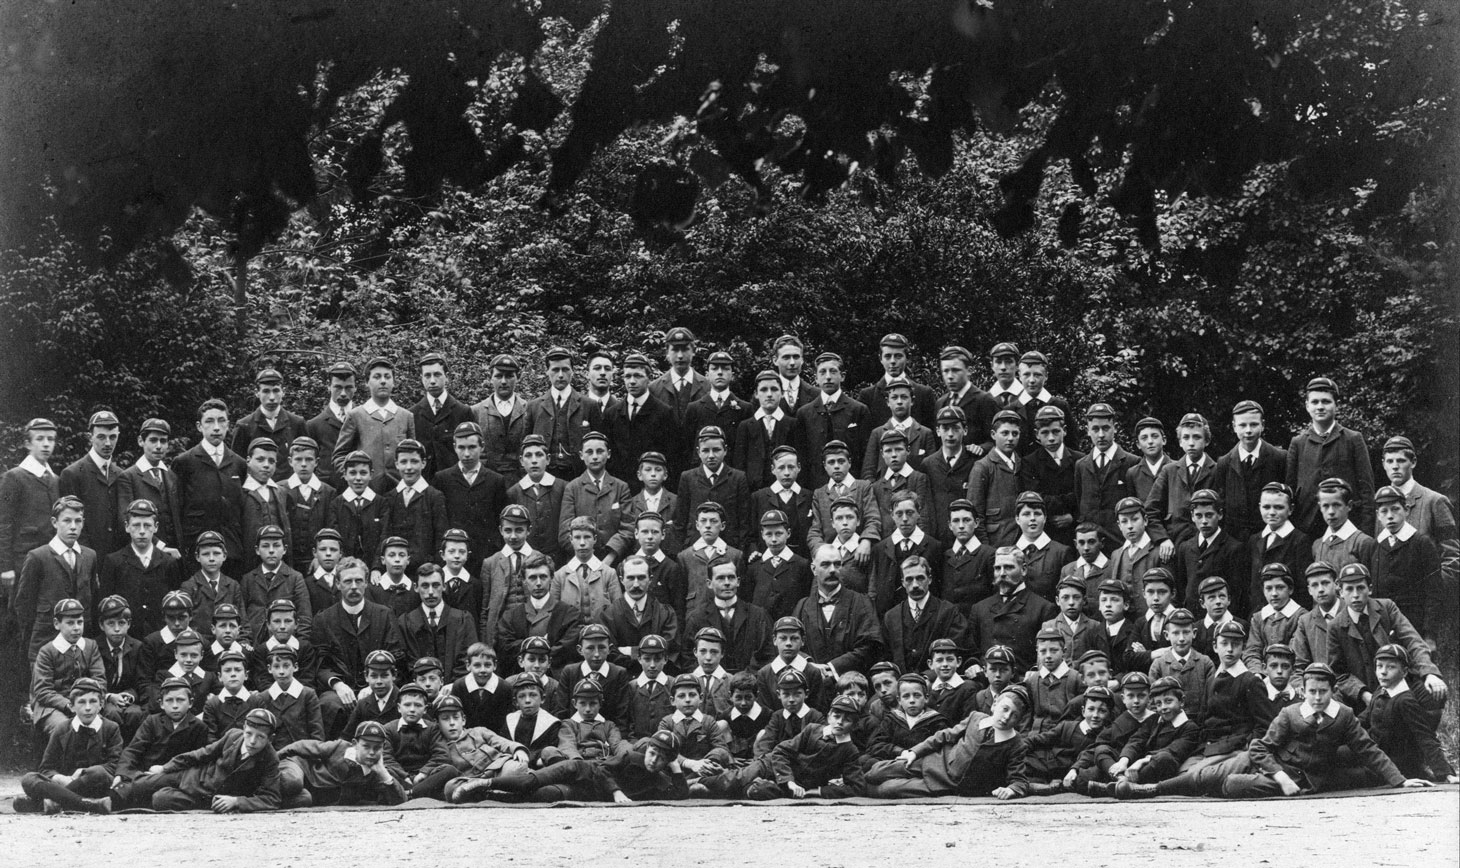 This whole-school photo from 1904 is one of the earliest we have